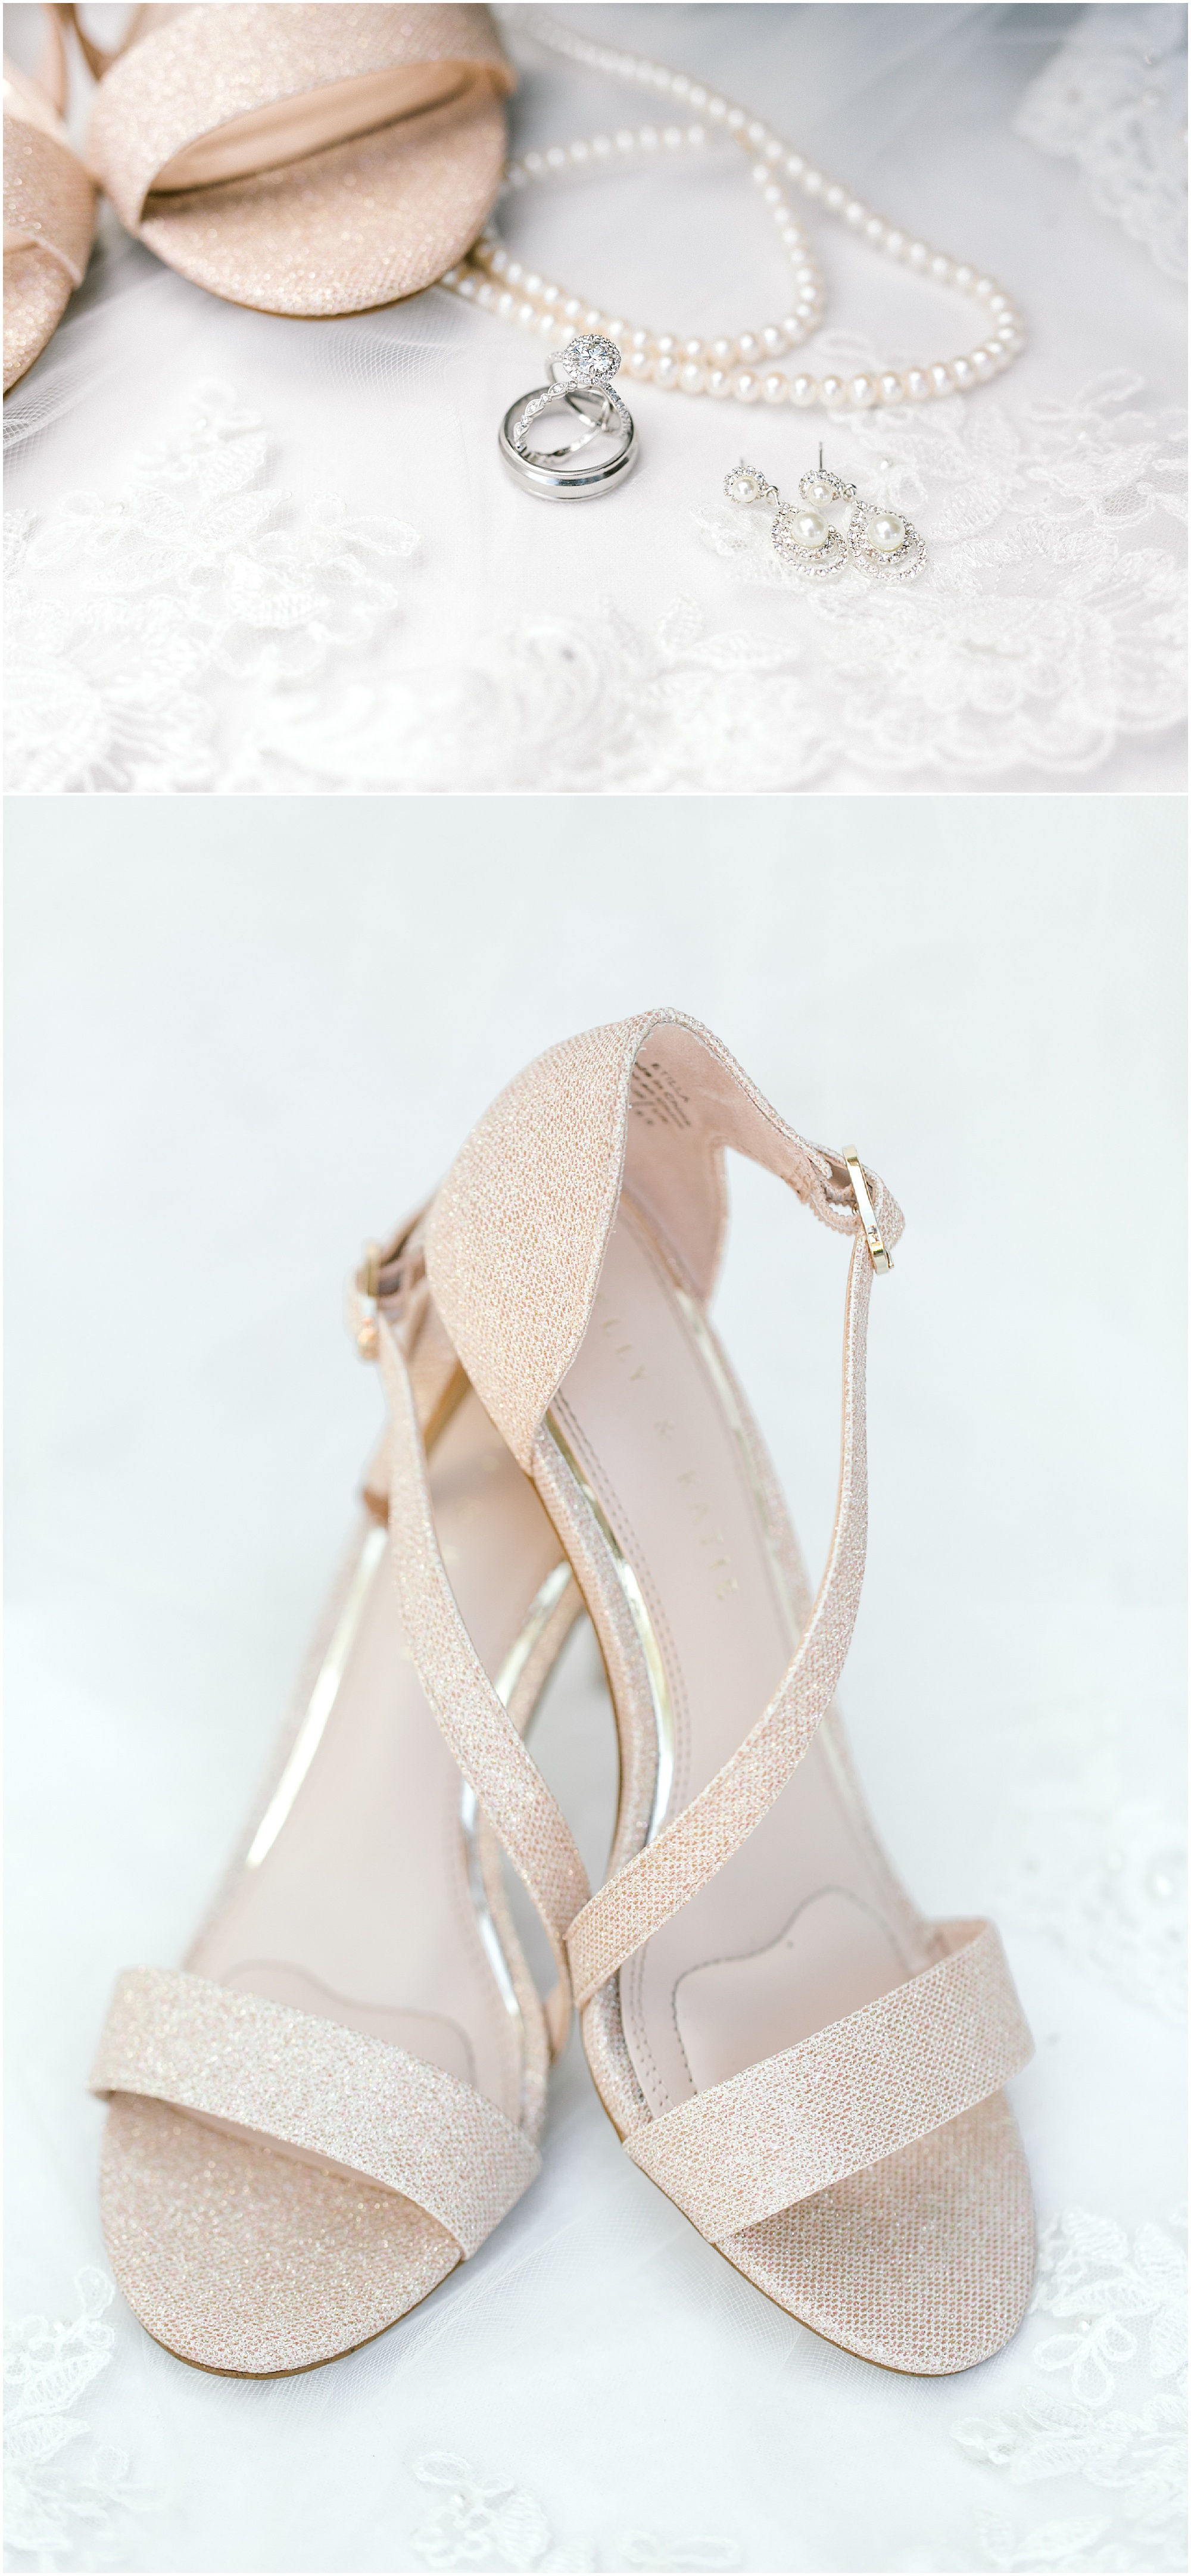 Bride's jewelry and shimmery pink shoes.